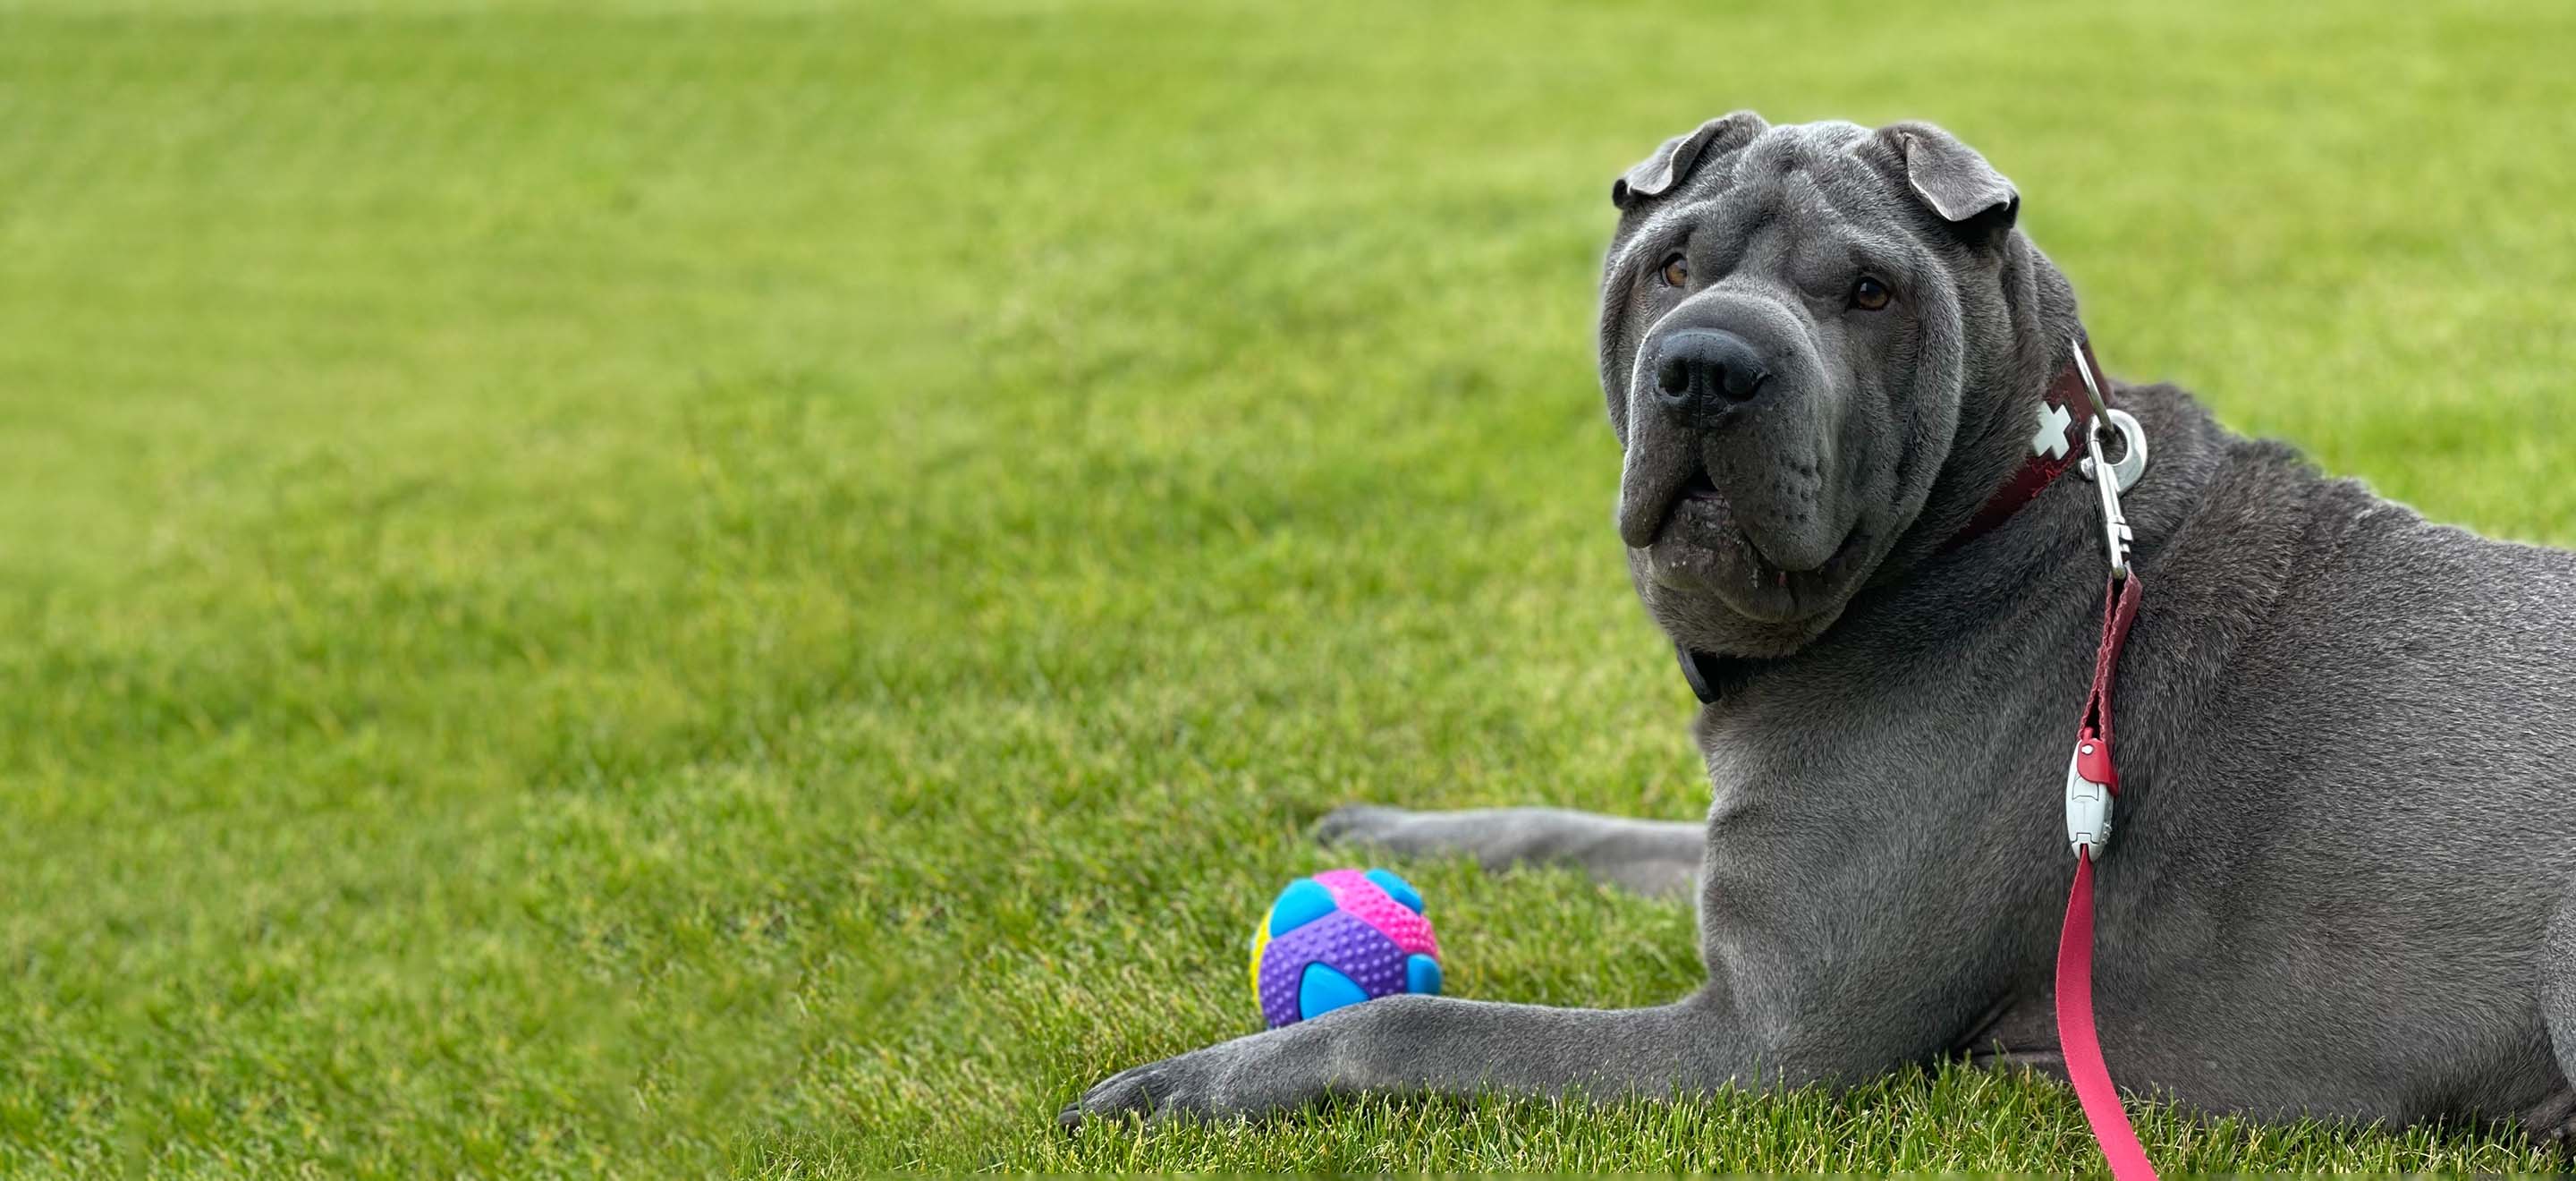 Gray Shar Pei dog with a red leash sitting in the grass with a ball toy image